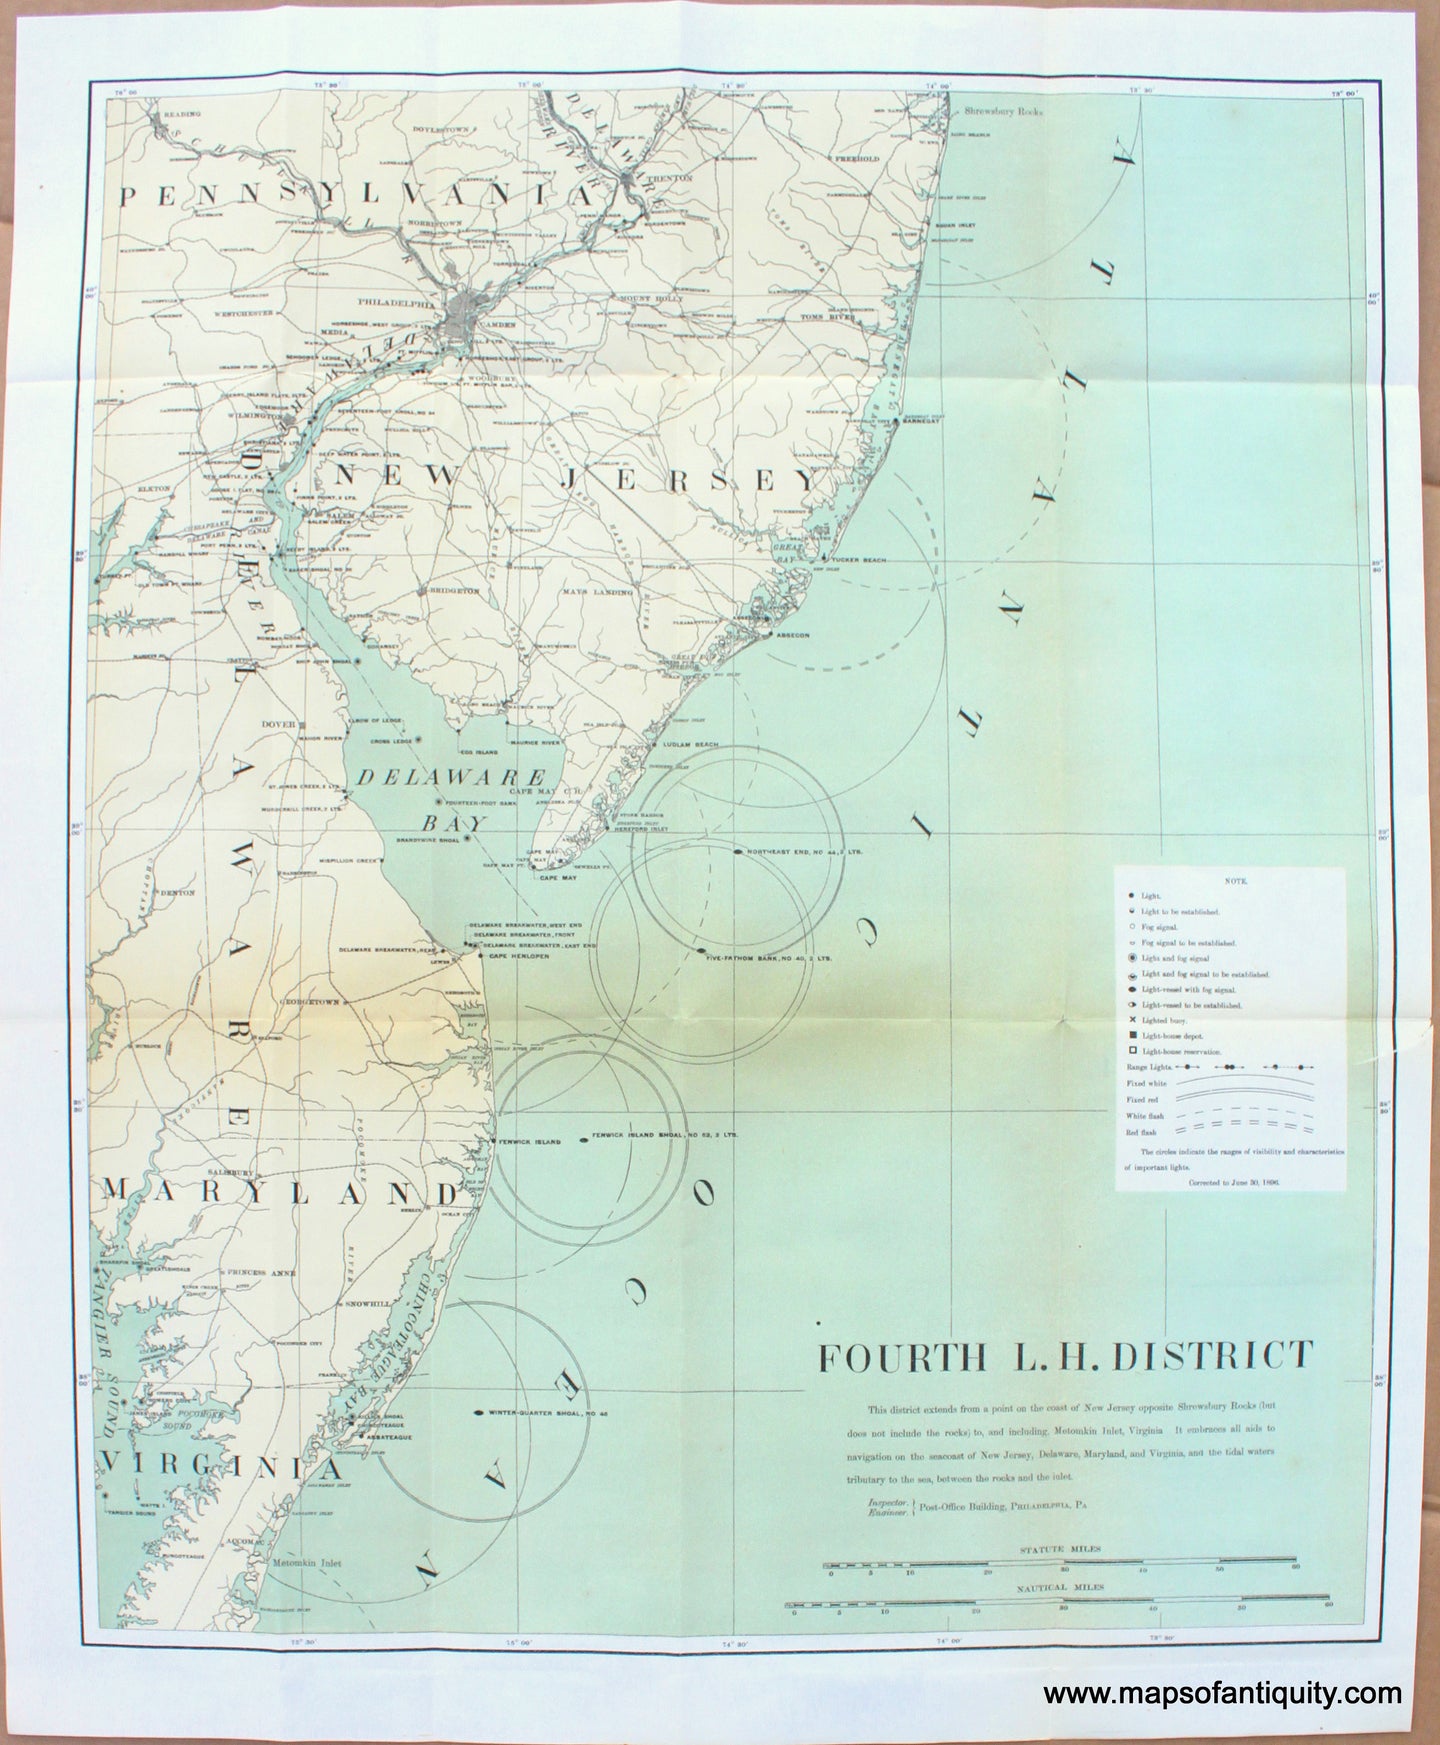 Printed-Color-Antique-Map-Lighthouses-of-the-Mid-Atlantic-Maryland-Delaware-New-Jersey-Pennsylvania-(larger-size)-United-States-West-1897-U.S.-Light-House-Service-Maps-Of-Antiquity